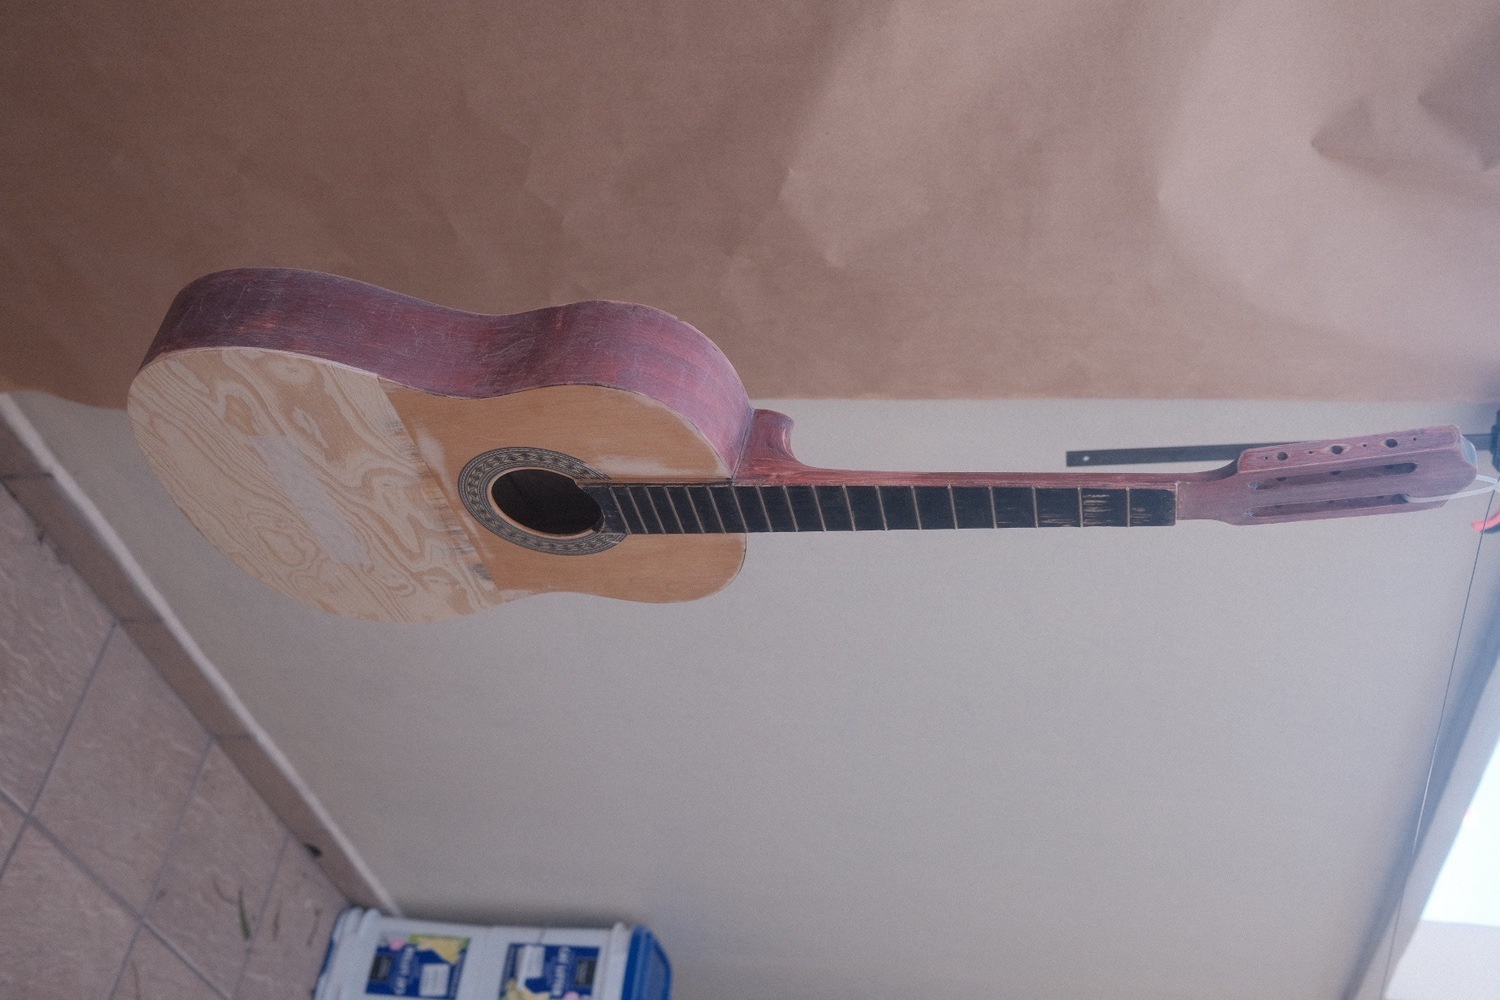 The guitar hanged from a wire to be painted